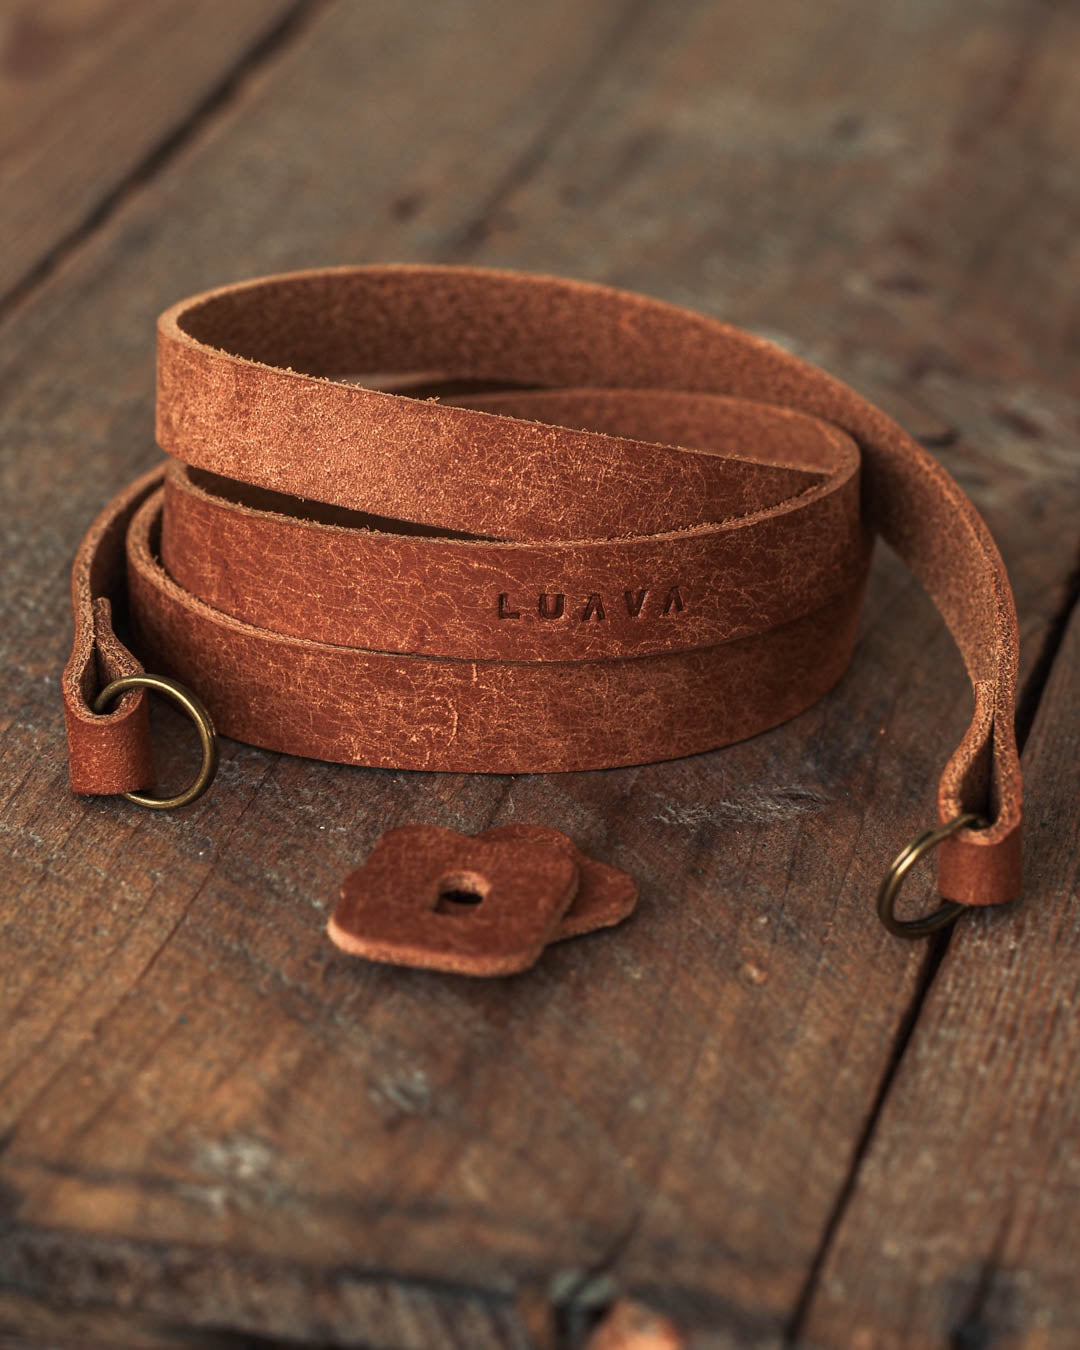 Luava handmade leather camera strap Ramble with leather bumpers